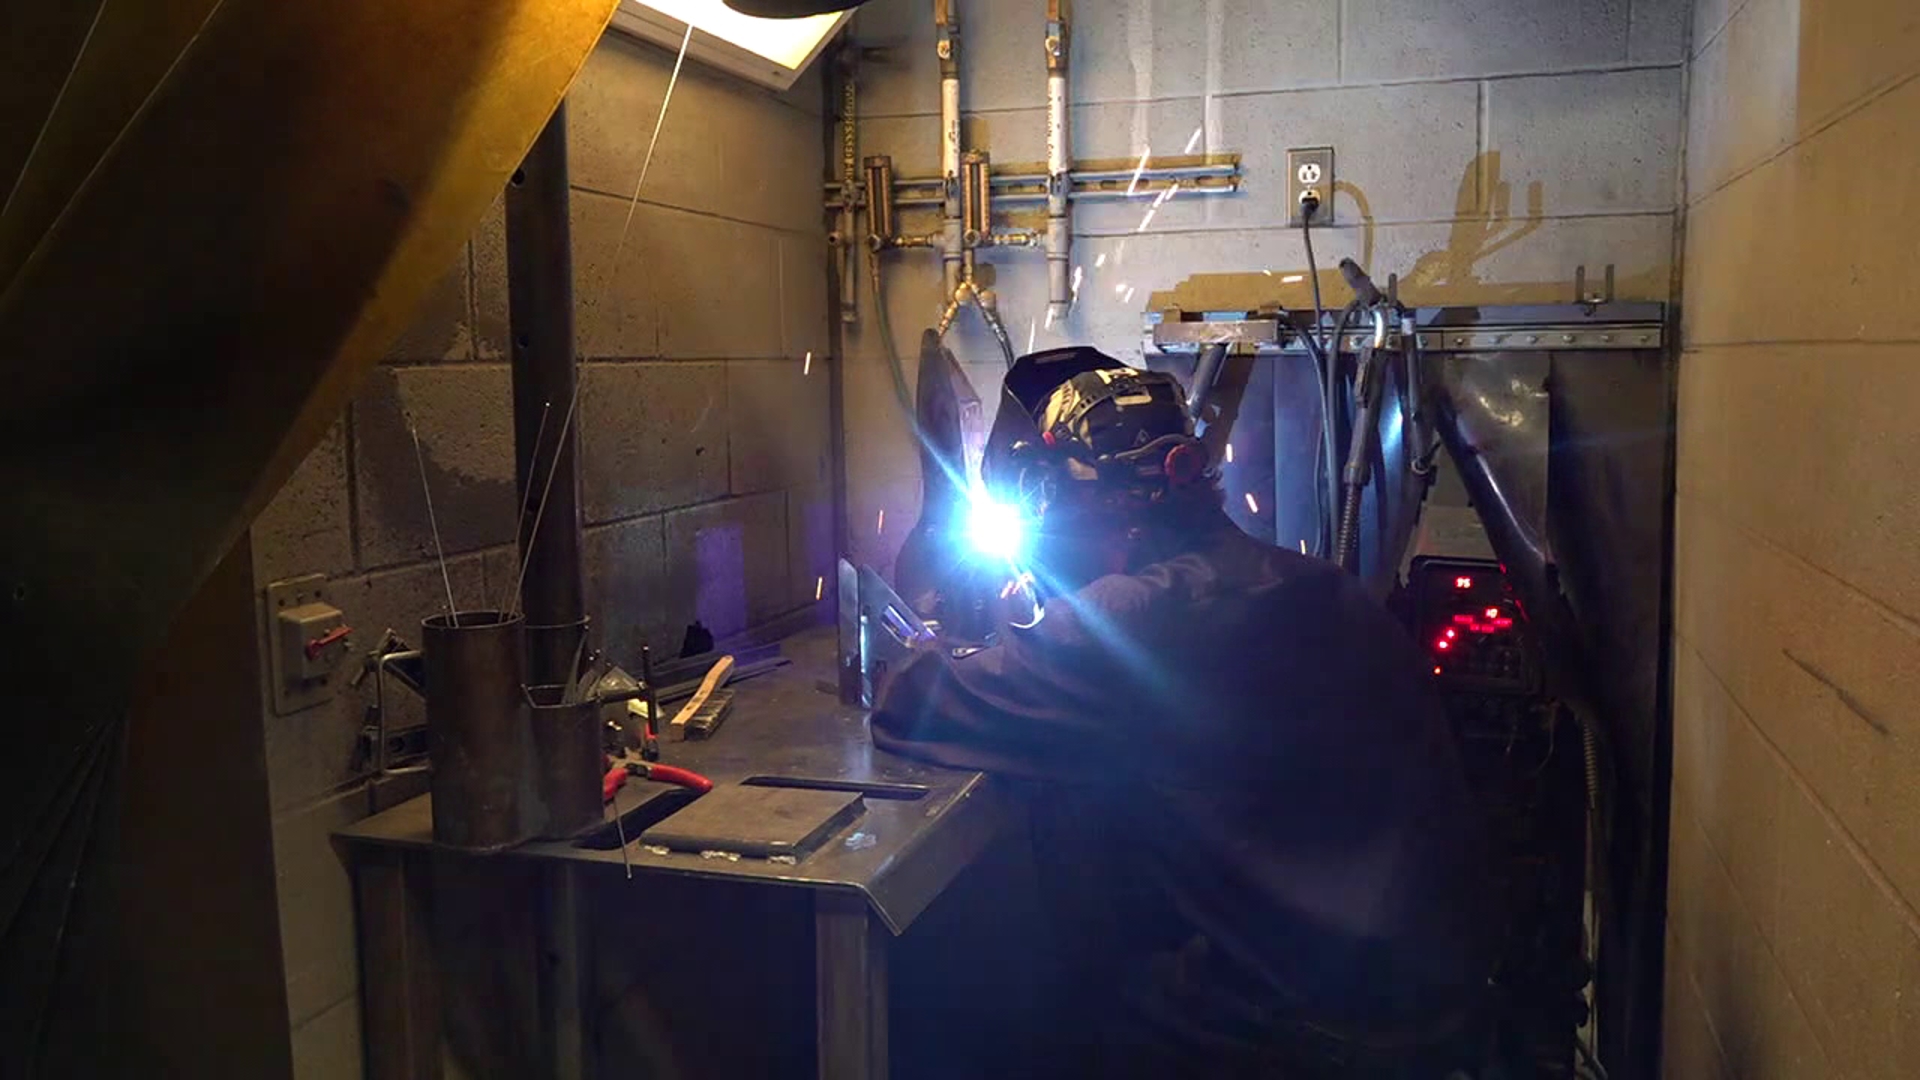 They are competing for a grand prize of $10,000 at a welding championship at Penn College of Technology. Newswatch 16's Mackenzie Aucker stopped by.